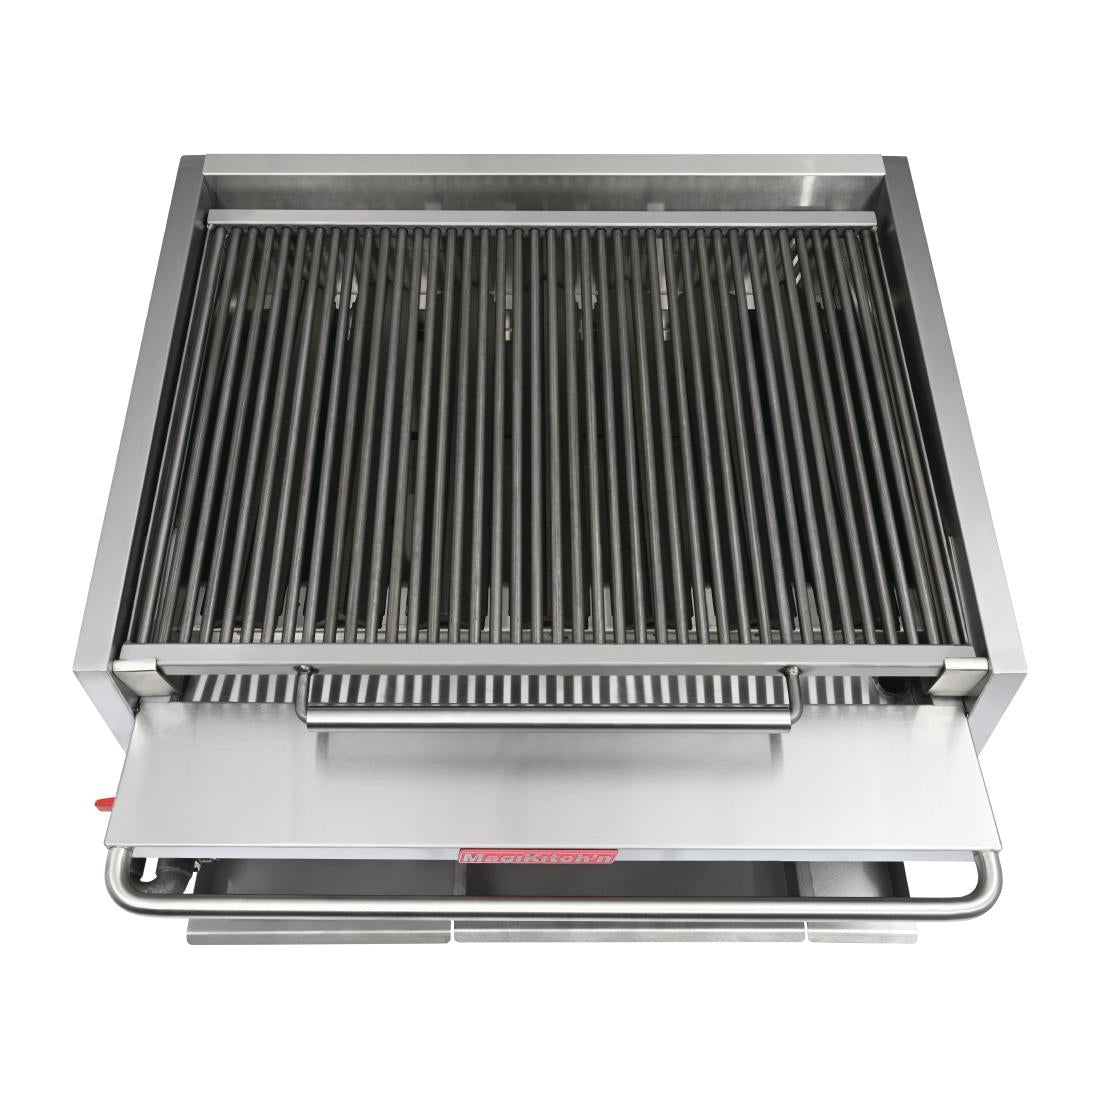 FP888 MagiKitch'n Gas Chargrill RMB648 JD Catering Equipment Solutions Ltd